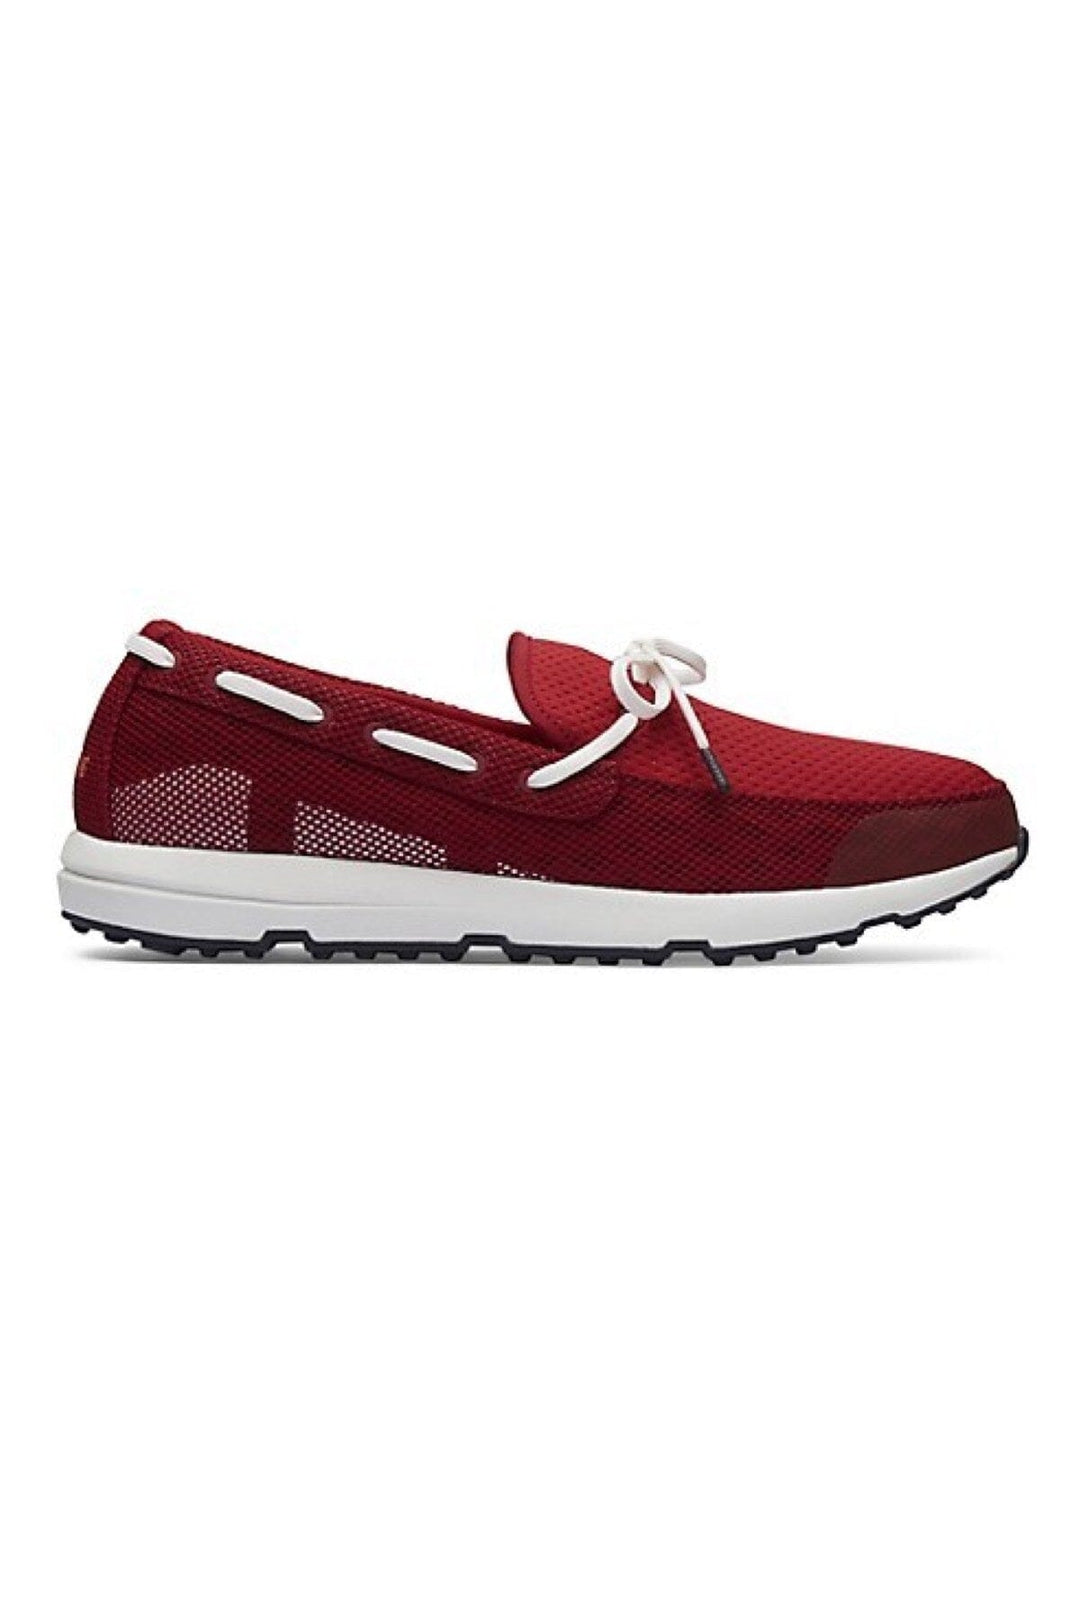 Breeze leap lace rouge Homme - Chaussures - Mocassins Swims